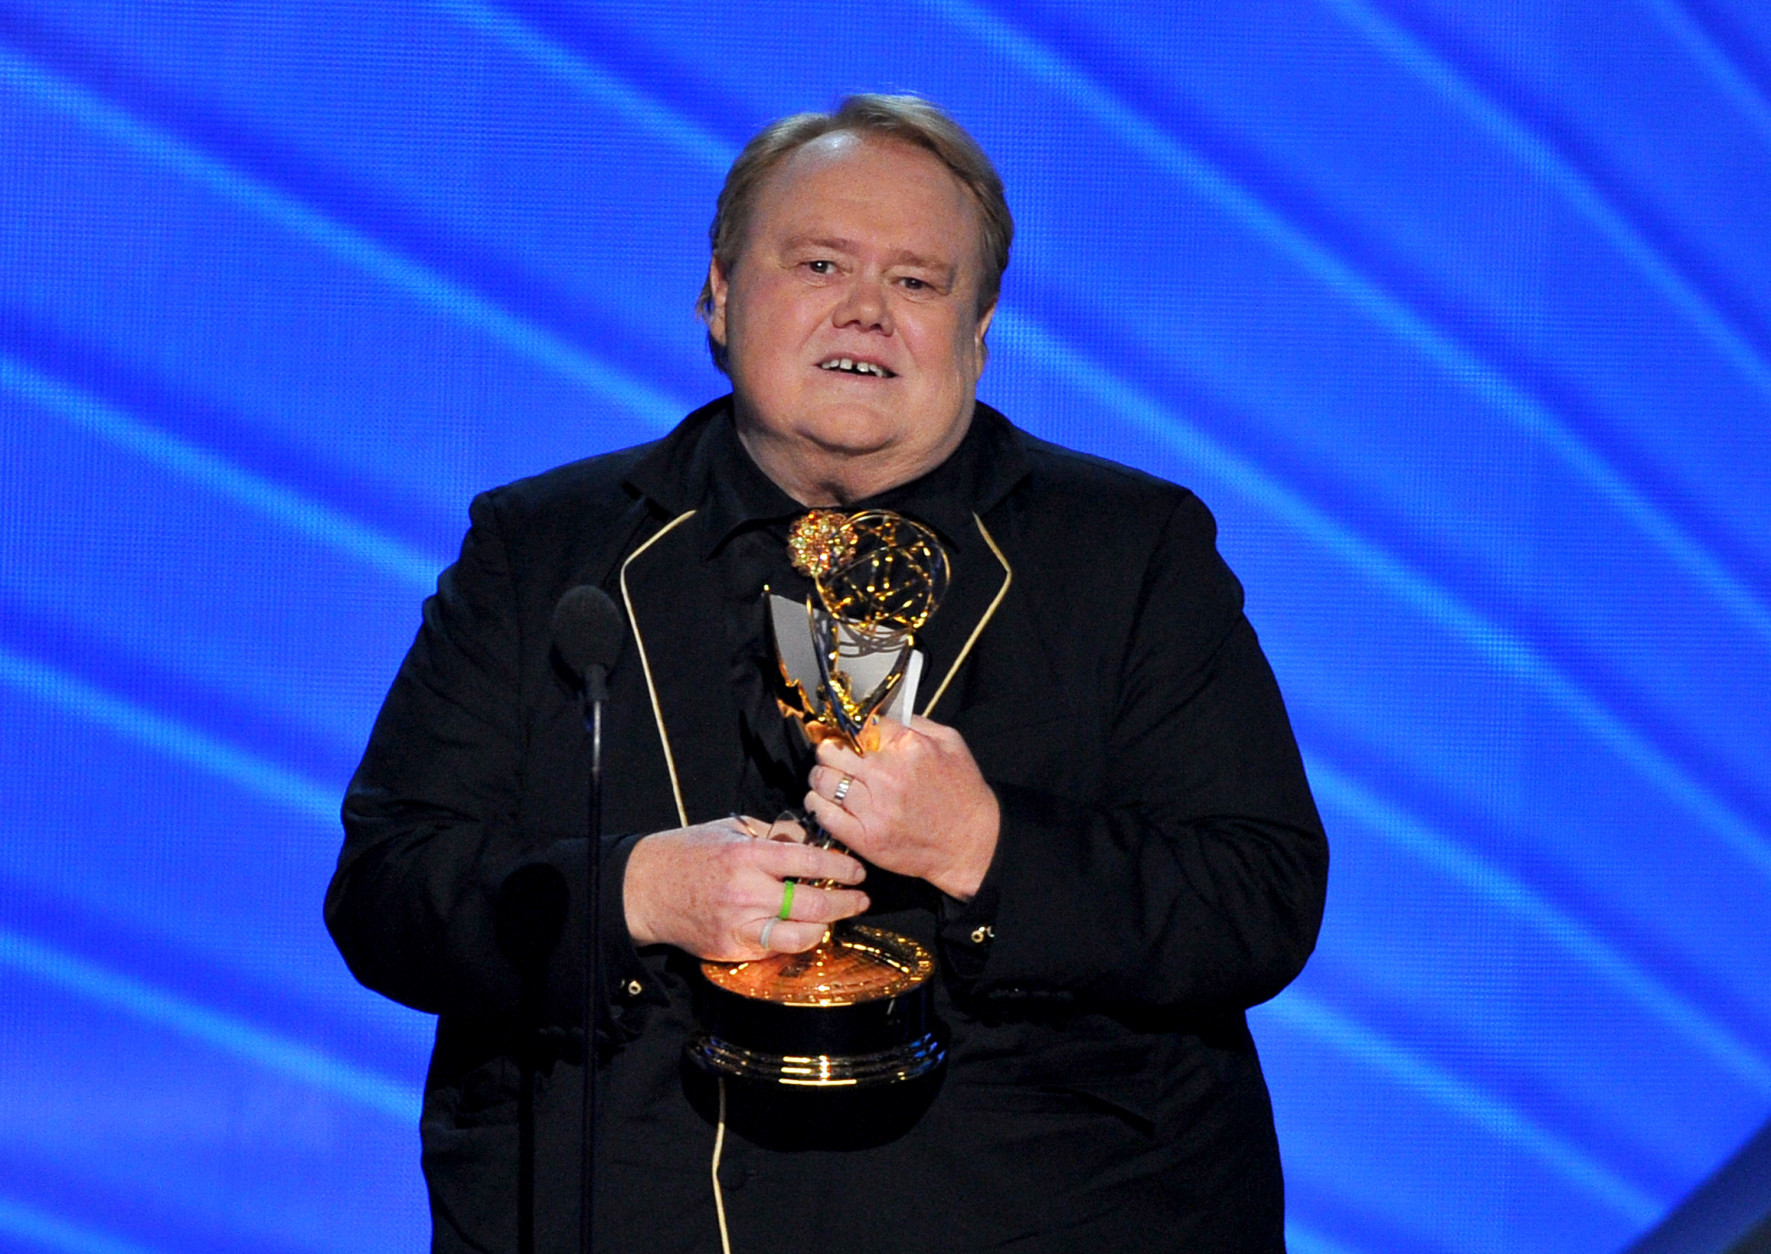 Louis Anderson accepts the award for outstanding supporting actor in a comedy series for Baskets at the 68th Primetime Emmy Awards on Sunday, Sept. 18, 2016, at the Microsoft Theater in Los Angeles. (Photo by Vince Bucci/Invision for the Television Academy/AP Images)